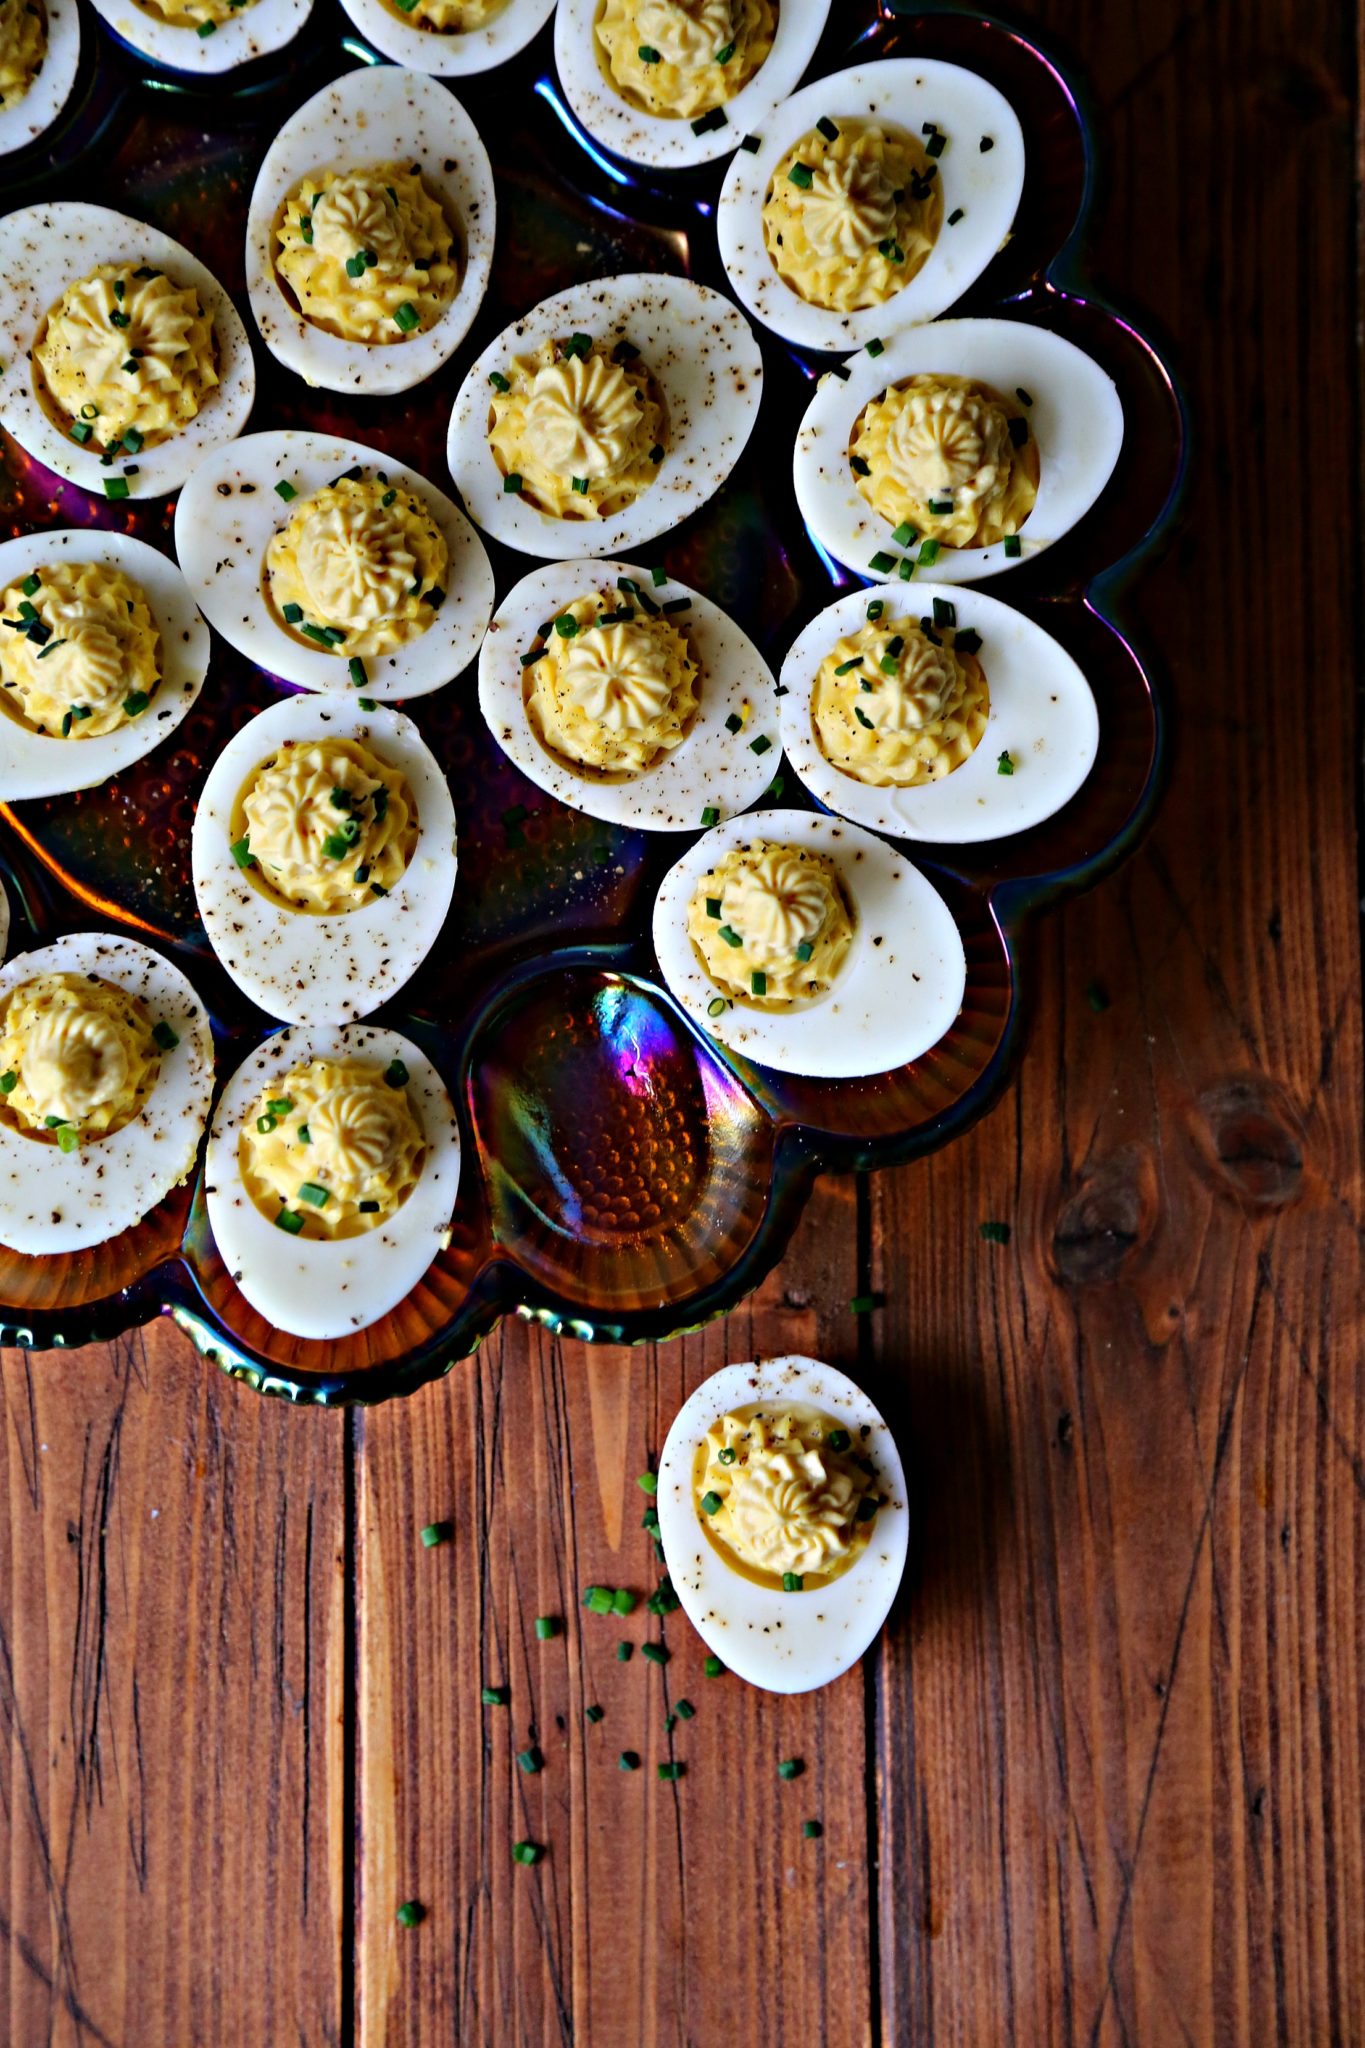 Deviled eggs on depression glass deviled egg plate. One egg in front. These classic Southern style Maille Deviled Eggs are the perfect appetizer or side dish to serve for your Easter brunch!